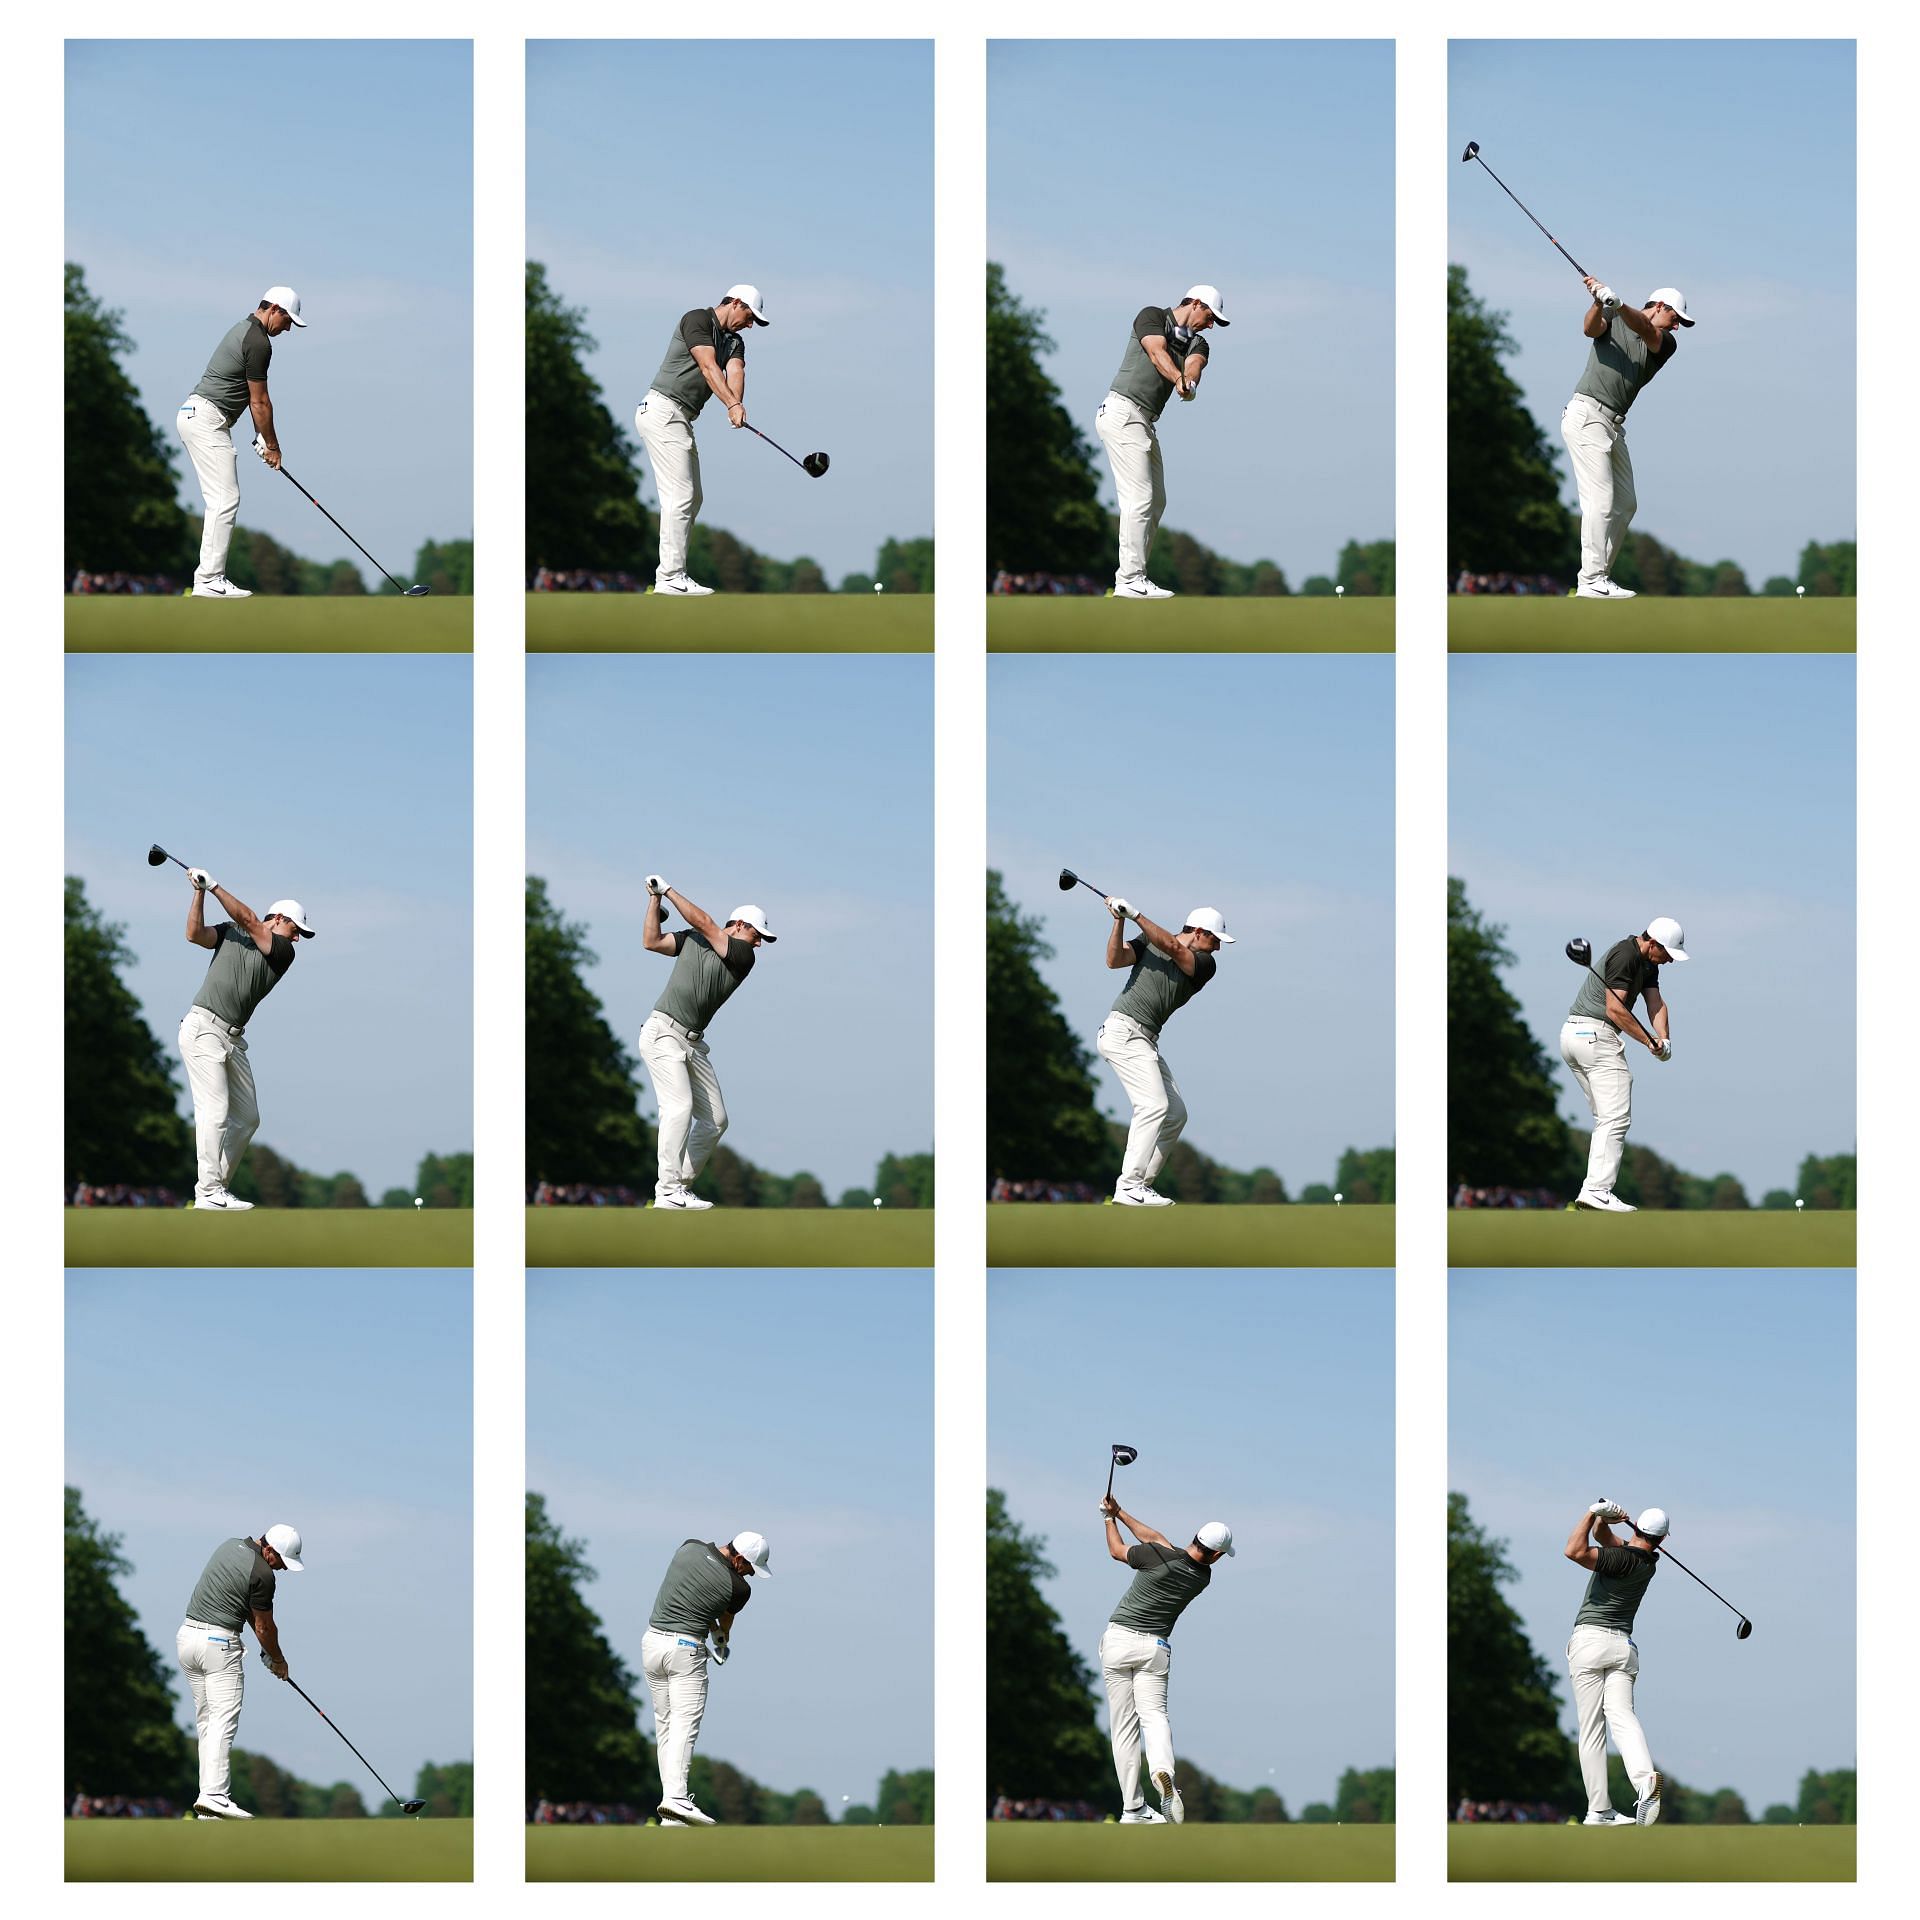 Swing sequence of Rory McIlroy, one of the best swingers in the sport. (Image via Getty)